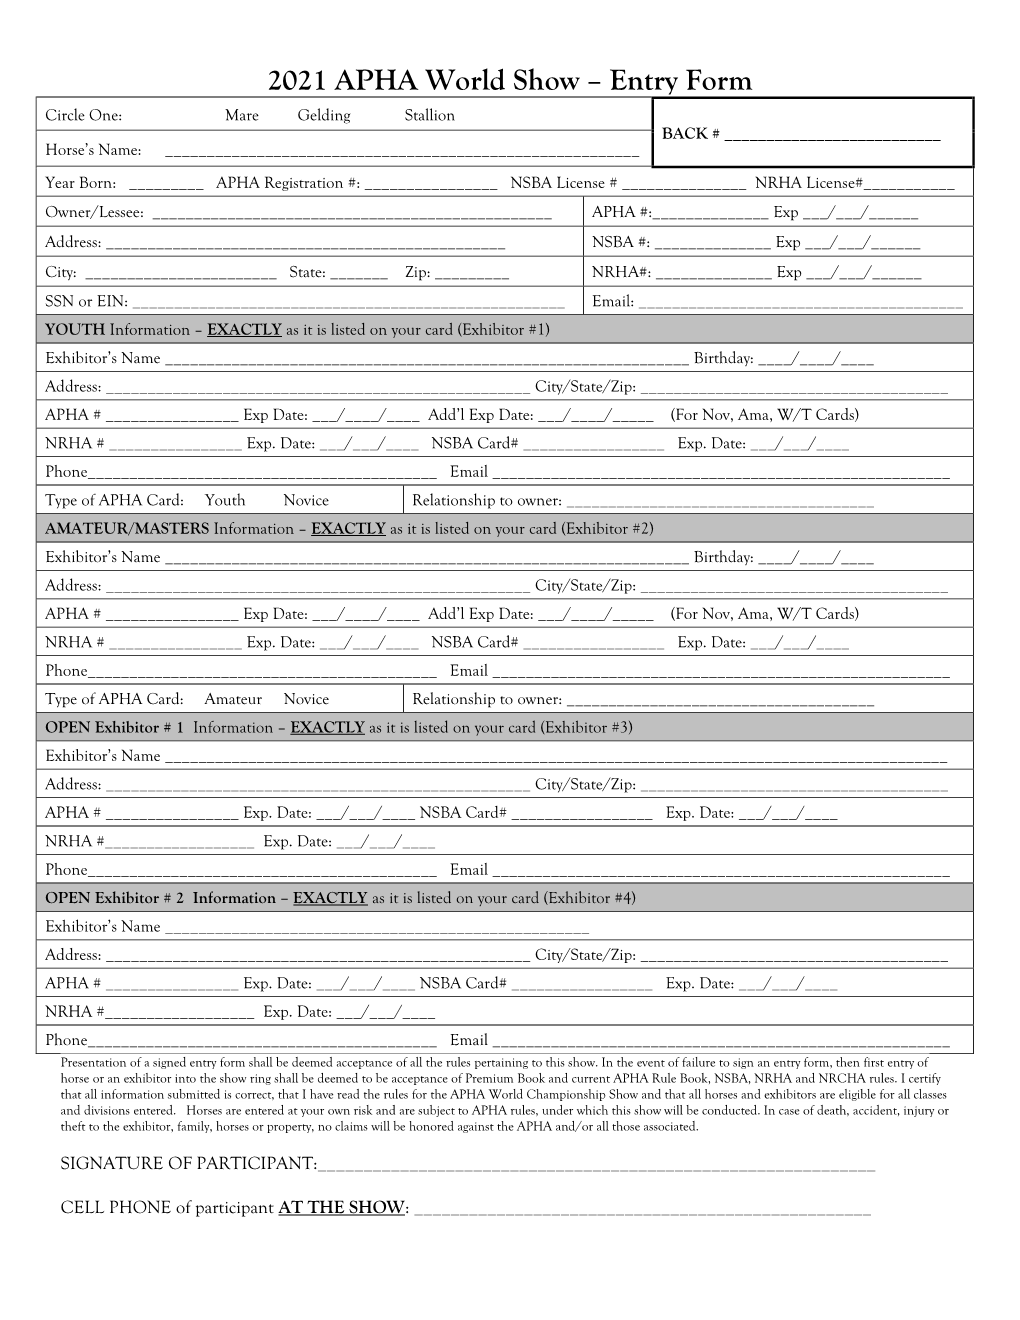 2021 APHA World Show Class Entry Form